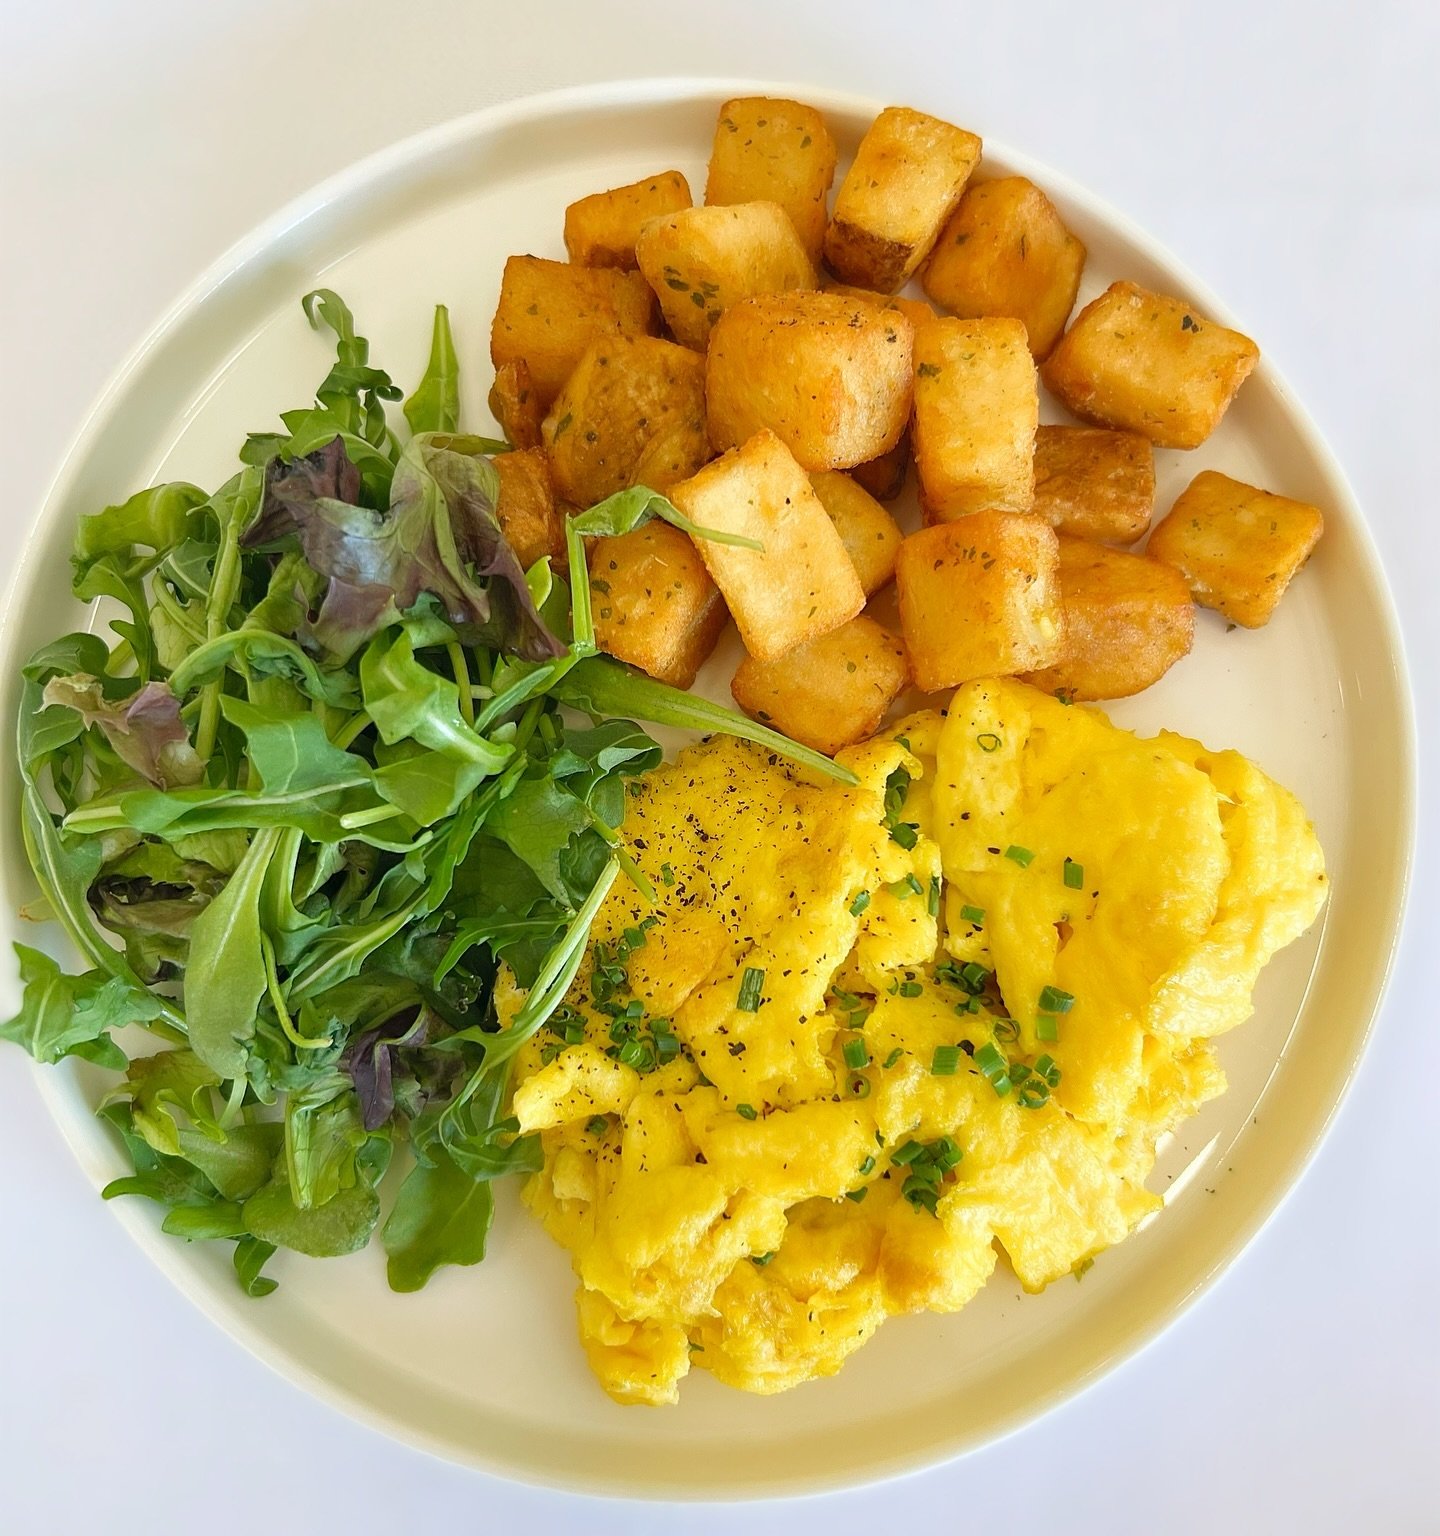 Scrambled eggs paired with our delicious Homestyle Fried Potatoes are a match made in heaven&hellip;Also part of our Mother&rsquo;s Day Brunch. 💐❤️ #ArlingtonHotel
.
Spots are limited so book your table today!Reservations close on Friday, May 10th 
